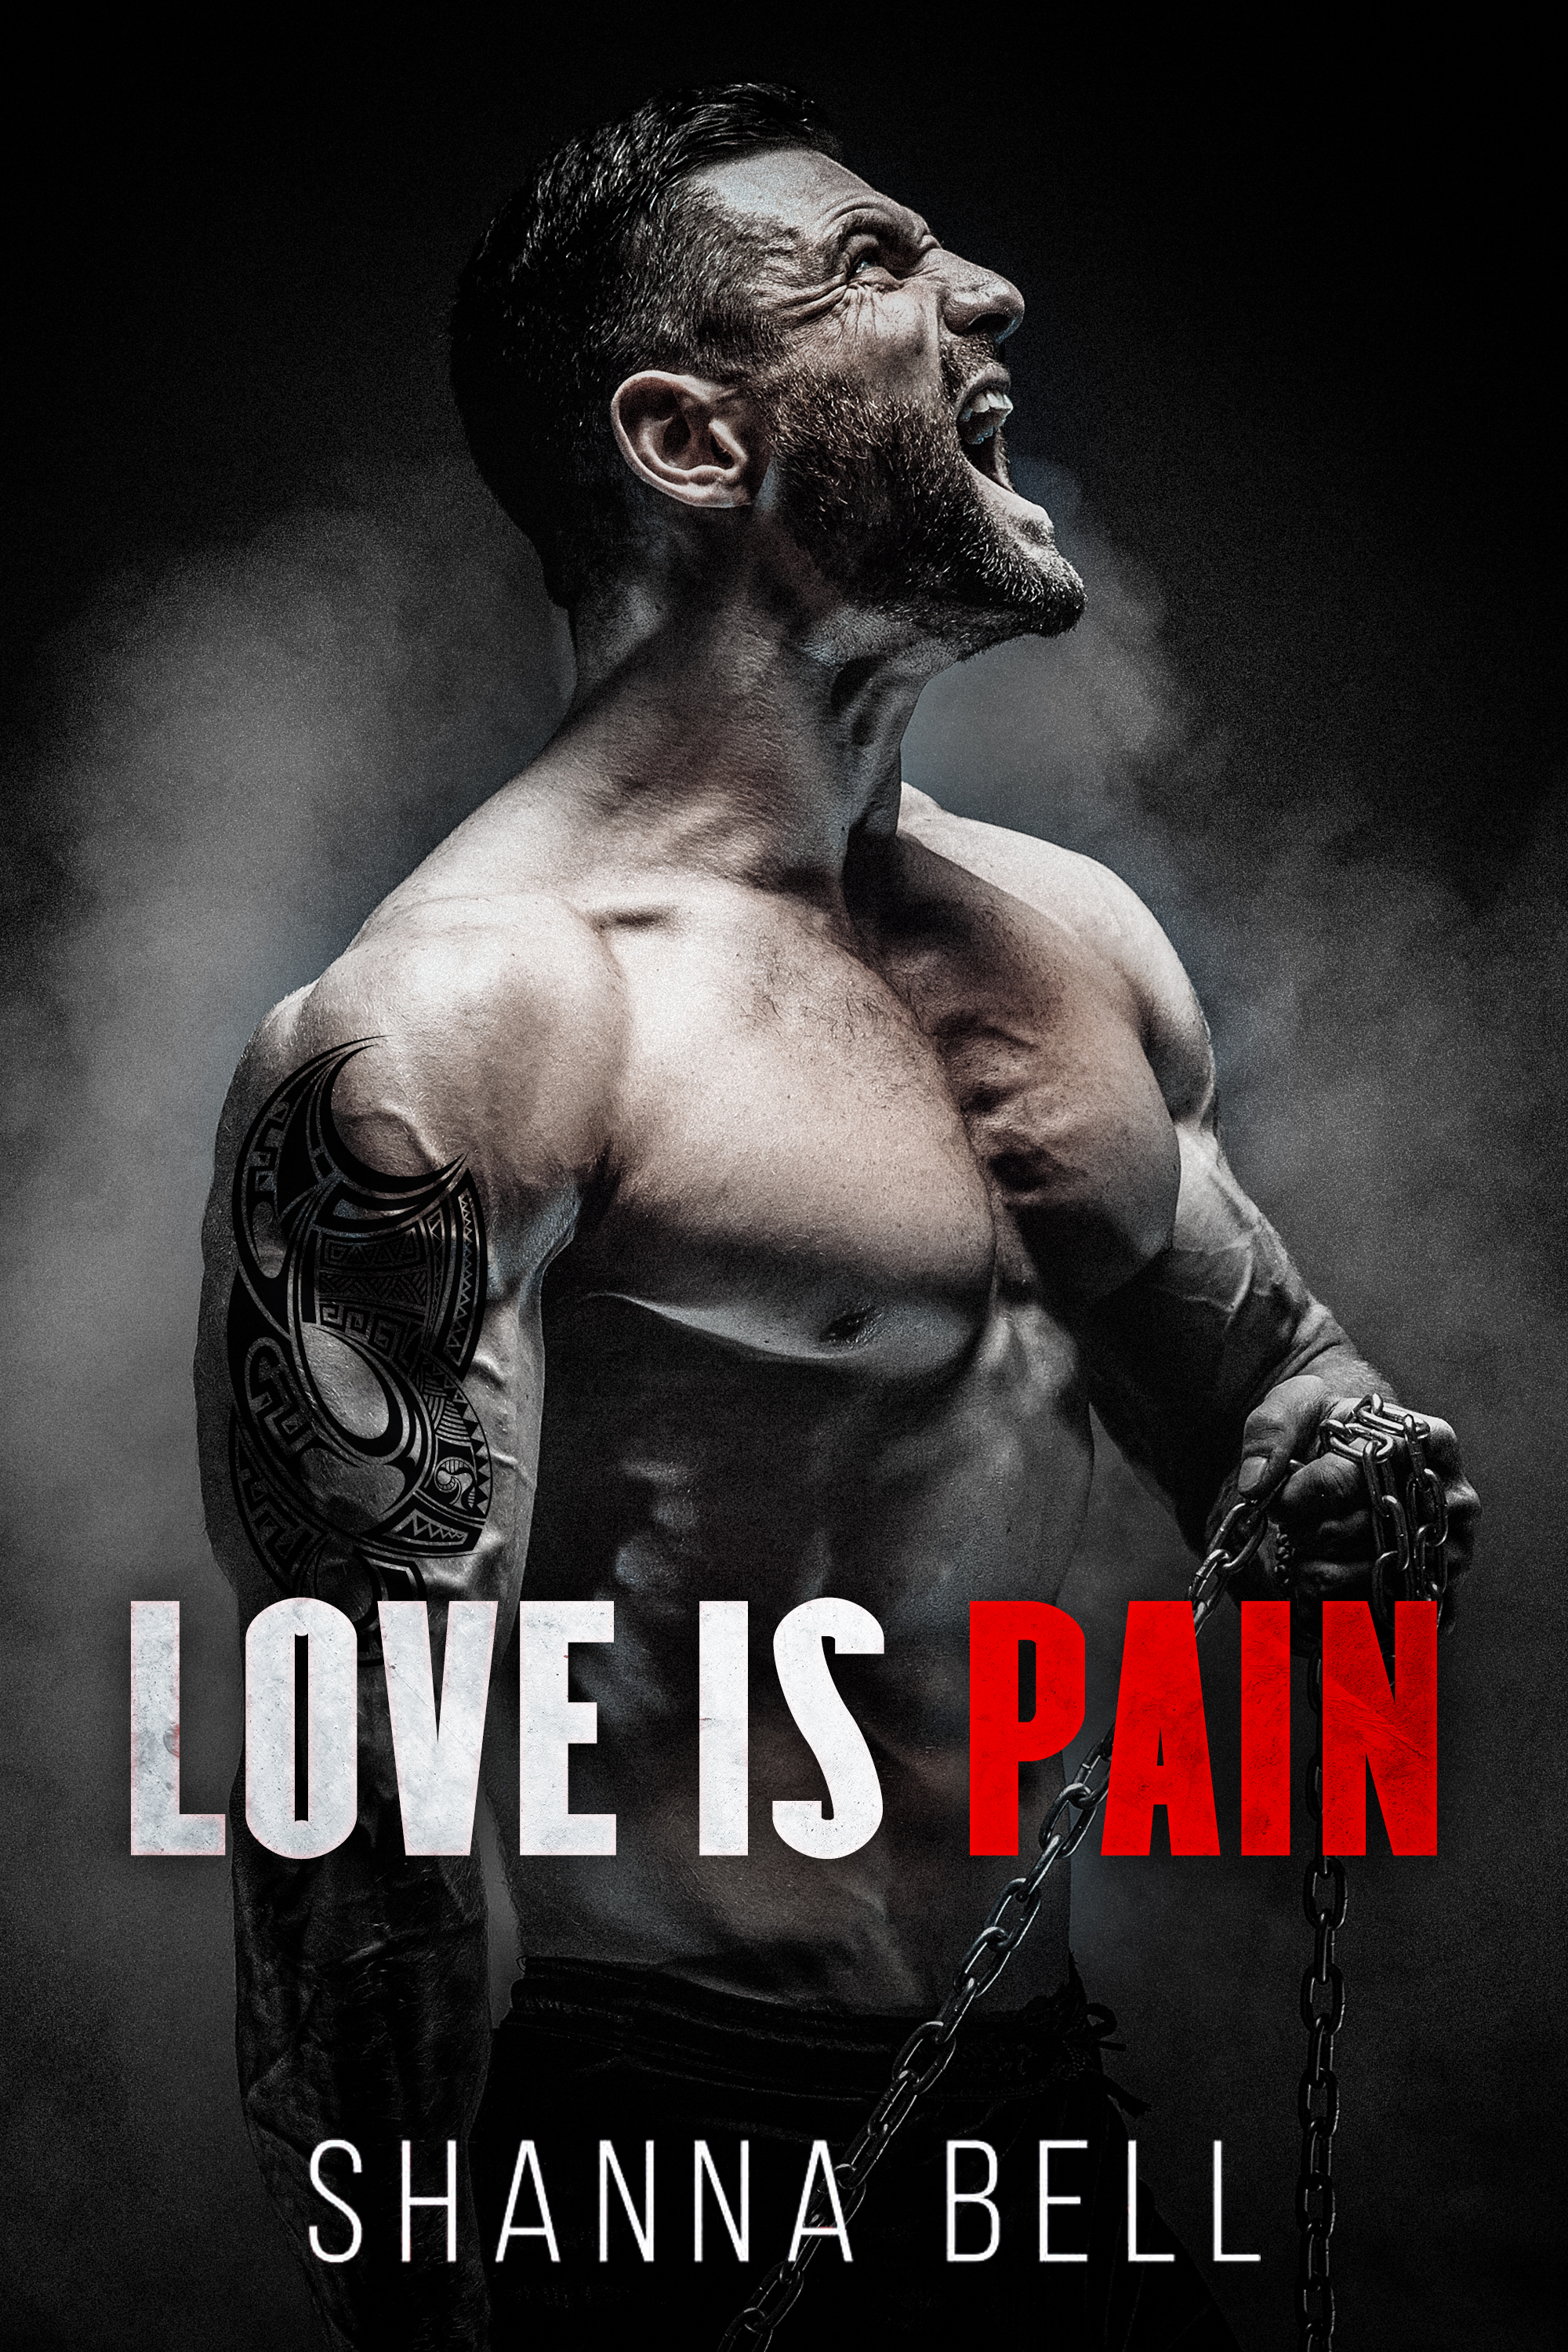 Love is pain